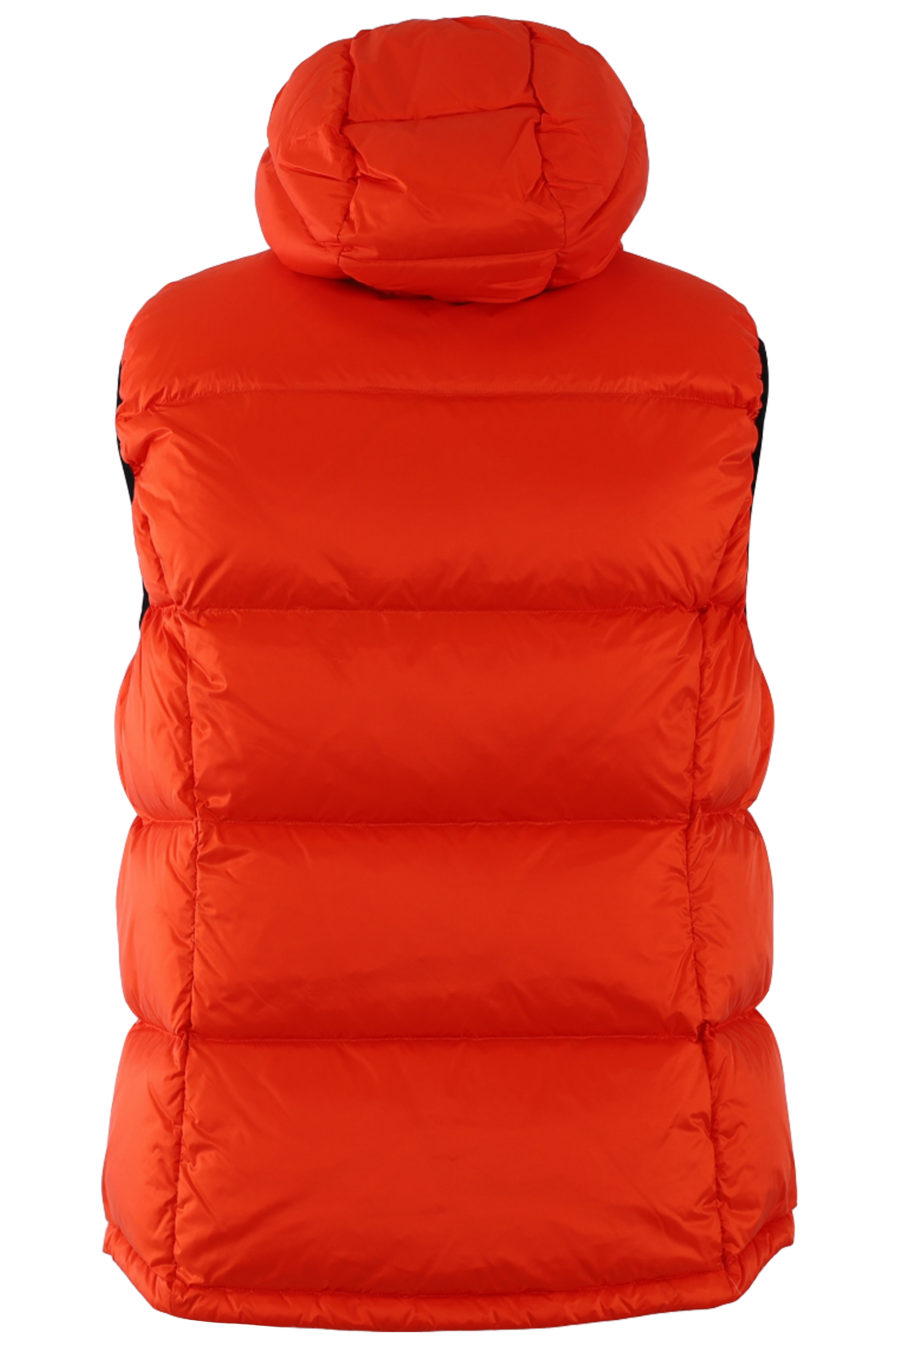 Orange quilted waistcoat with hood - IMG 0490